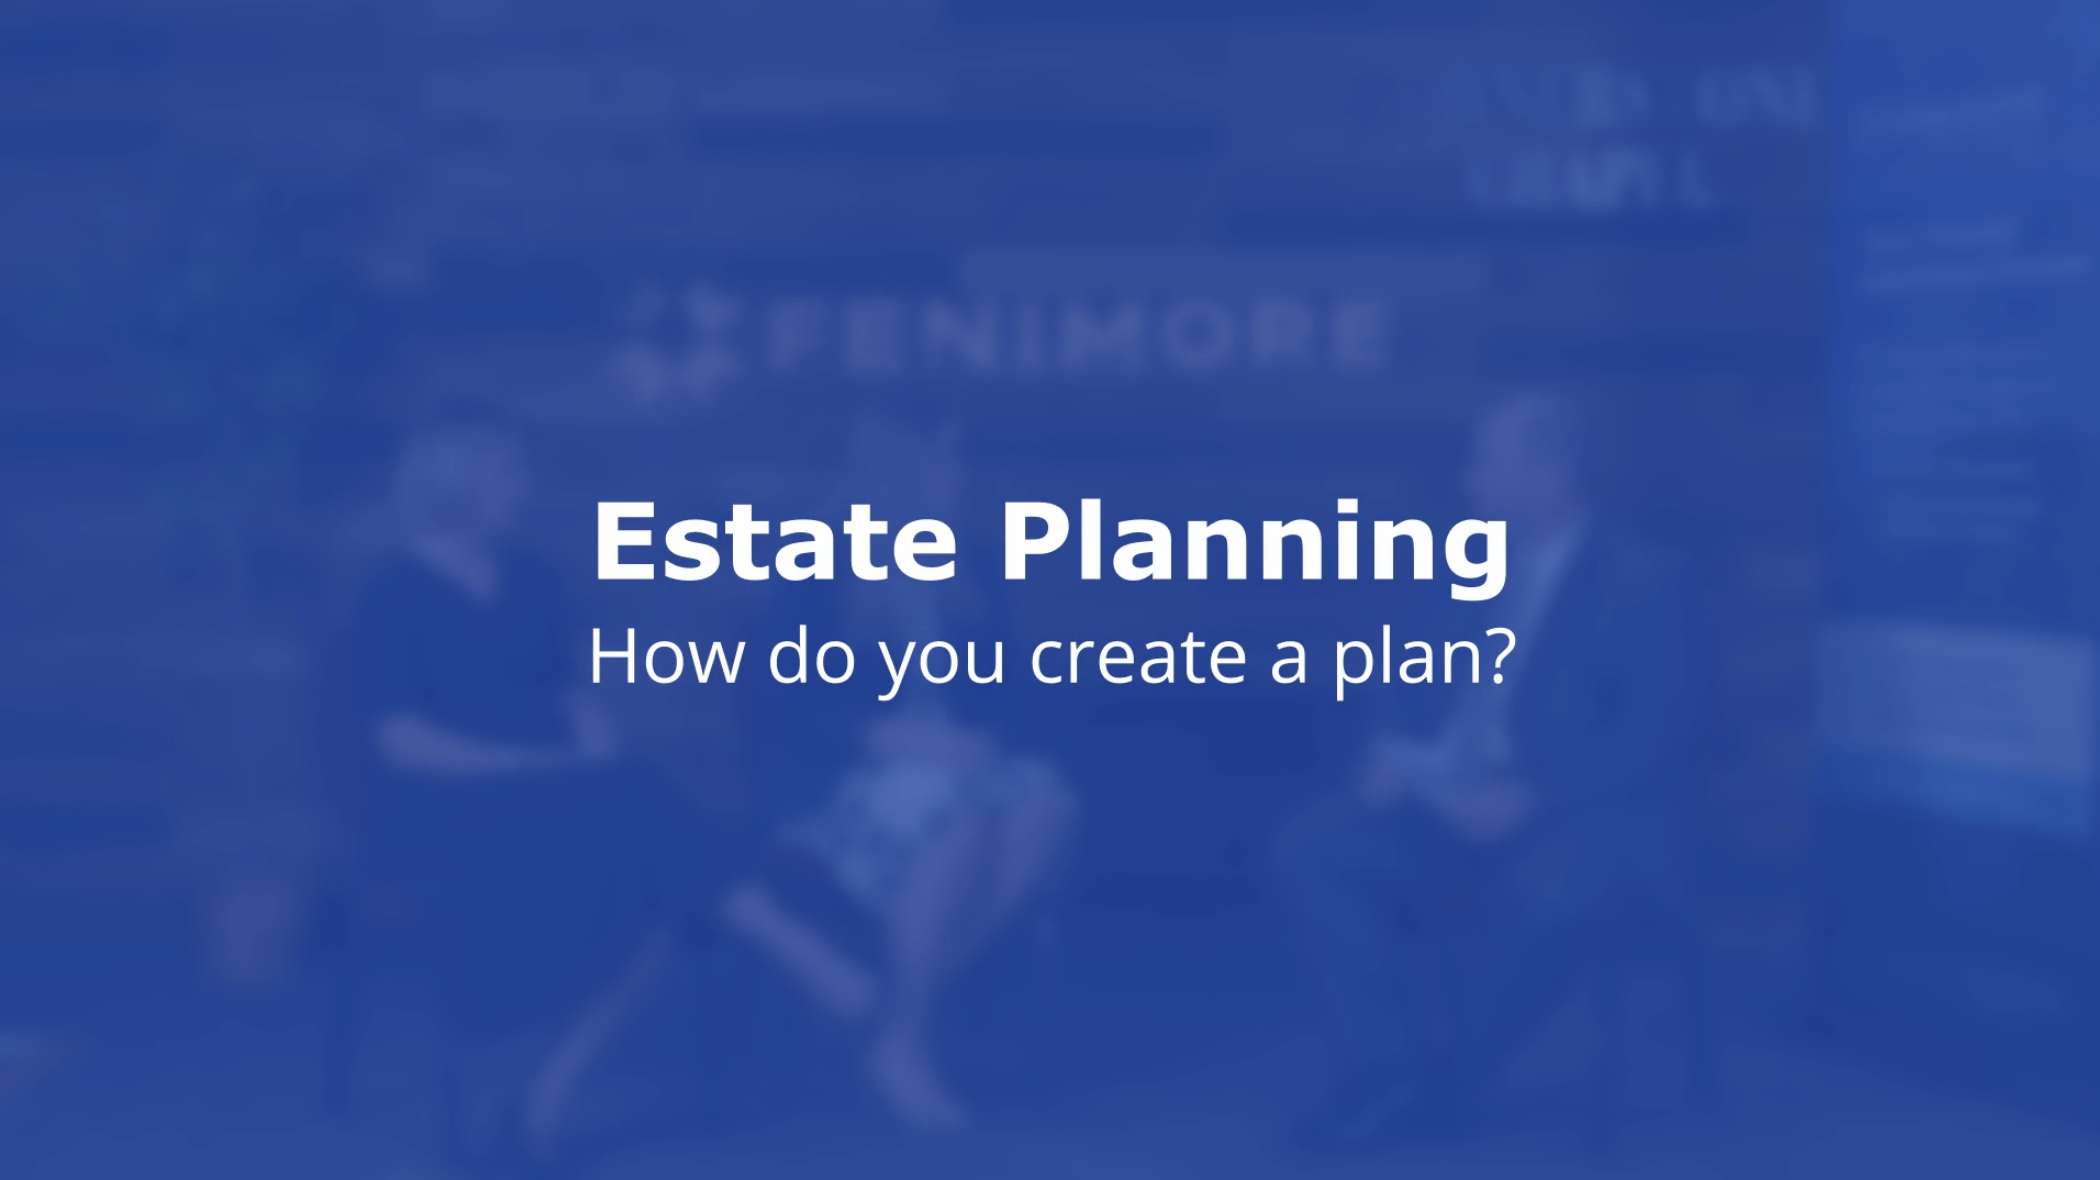 ESTATE PLANNING: How do you create a plan? 